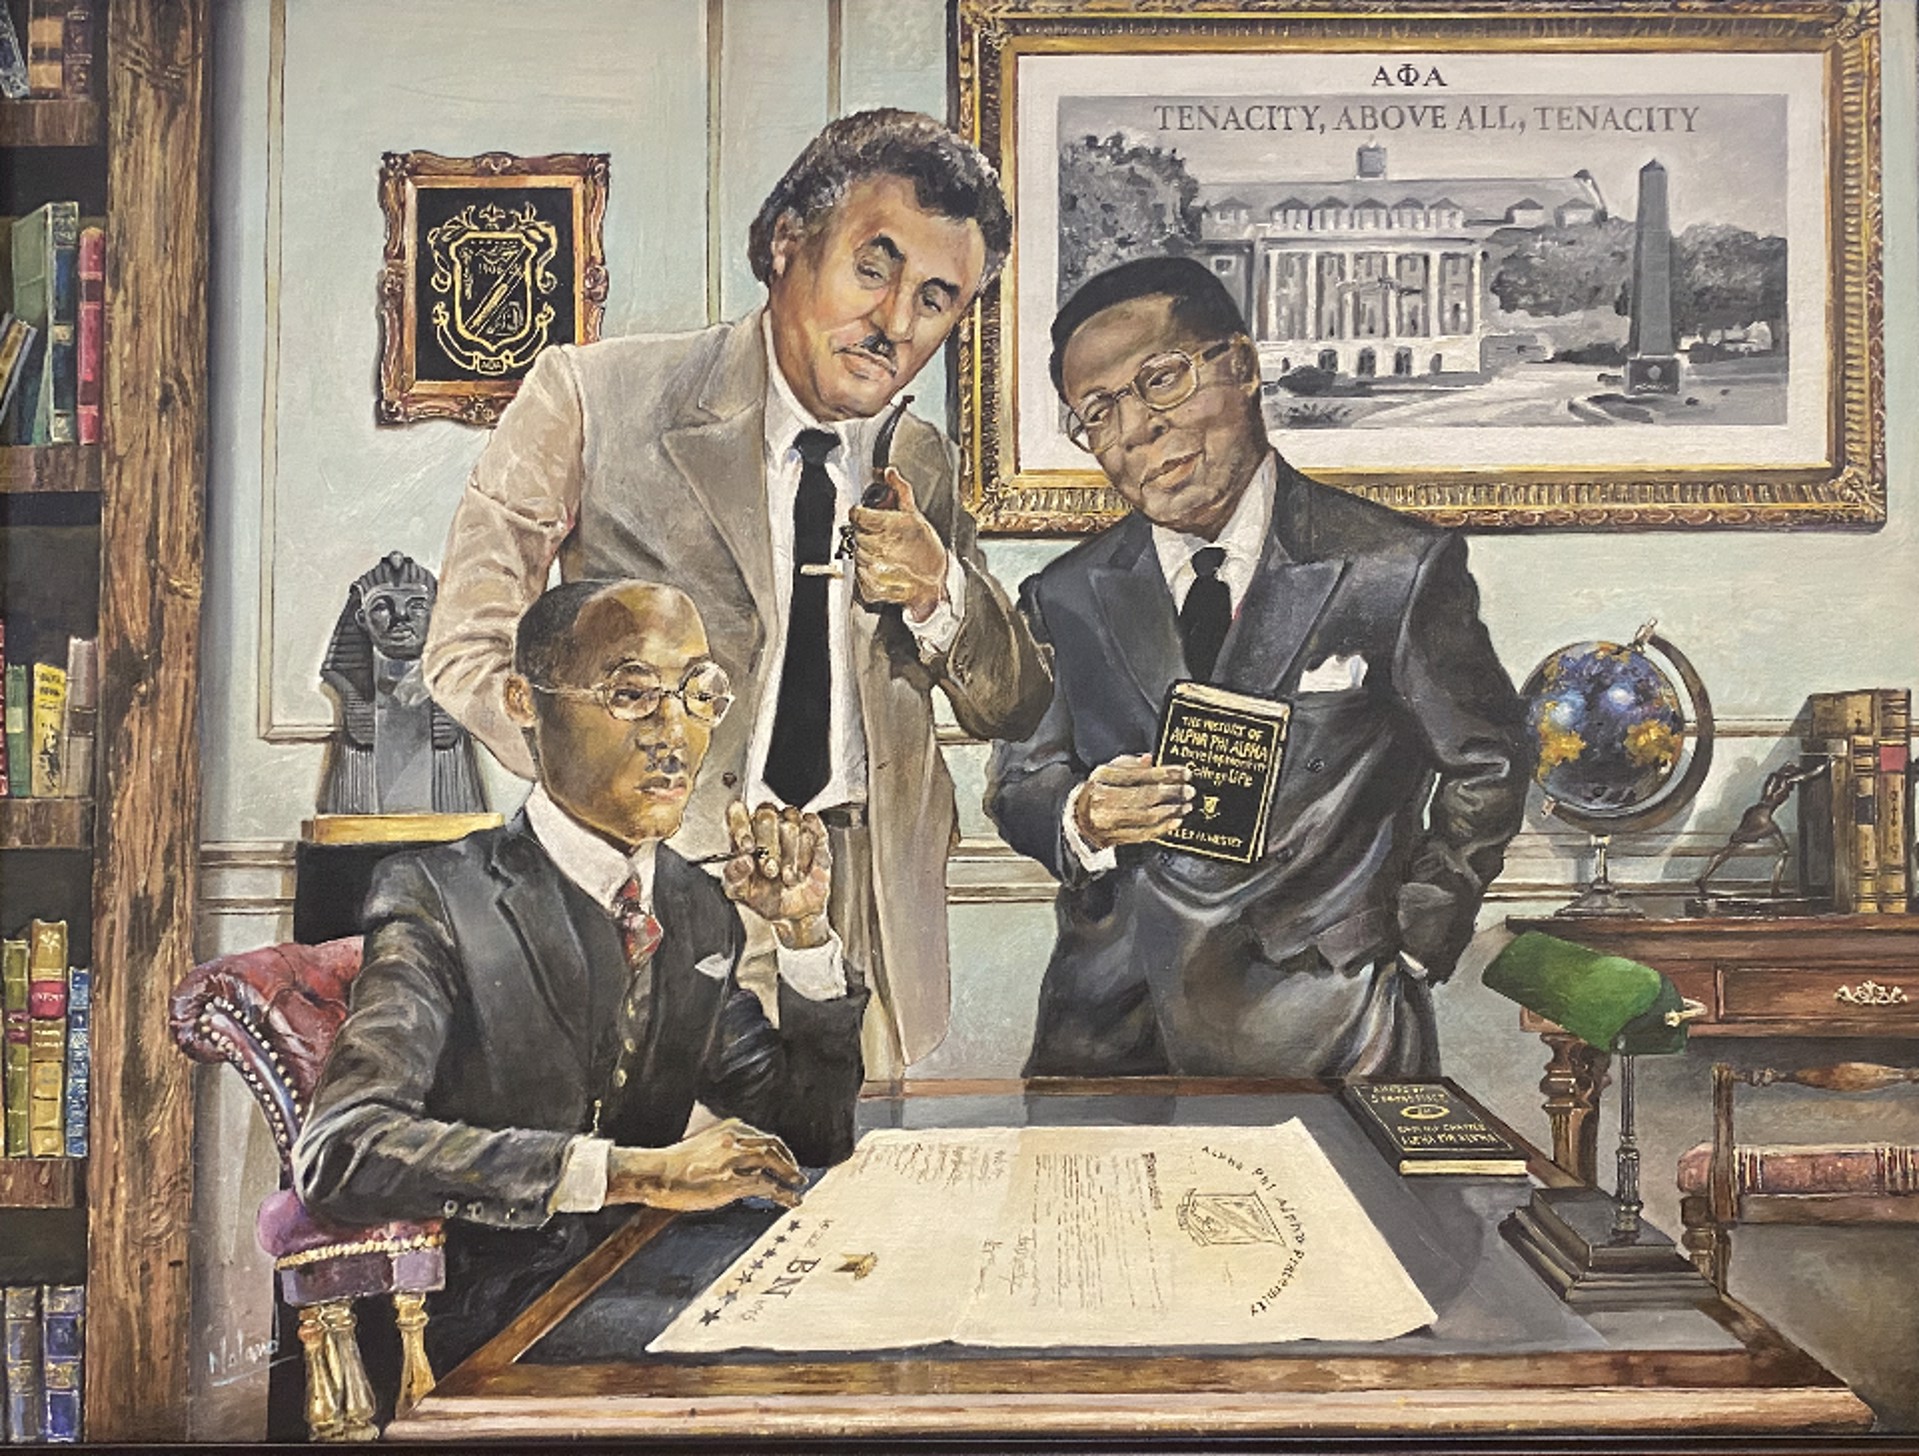  Signed Open Edition Print :  "Transcendent Achievement Through Transformational Leadership” by Noland Anderson